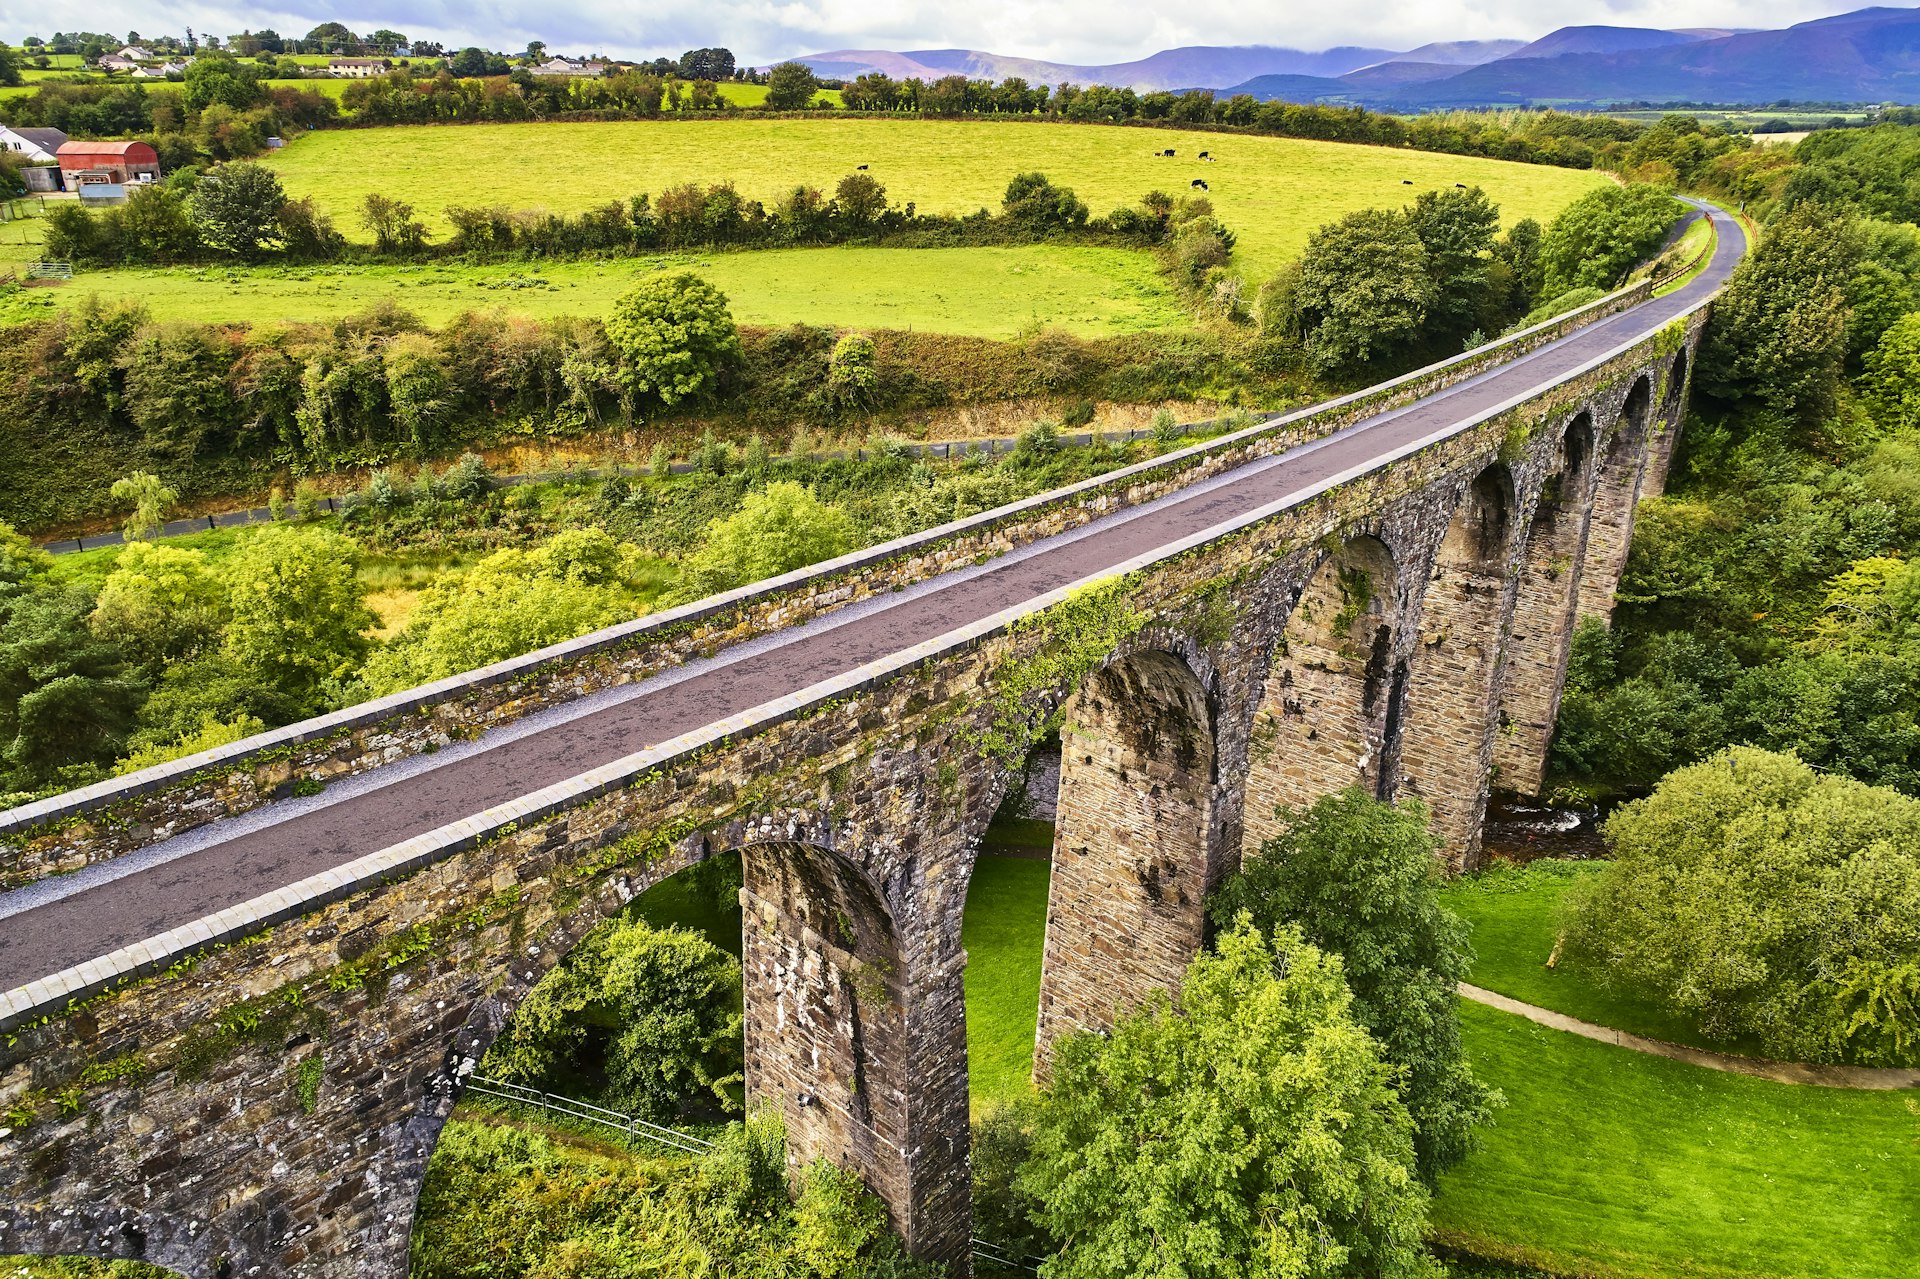 The Kilmacthomas Viaduct on the Waterford Greenway, Cooper Coast, County Waterford, Ireland